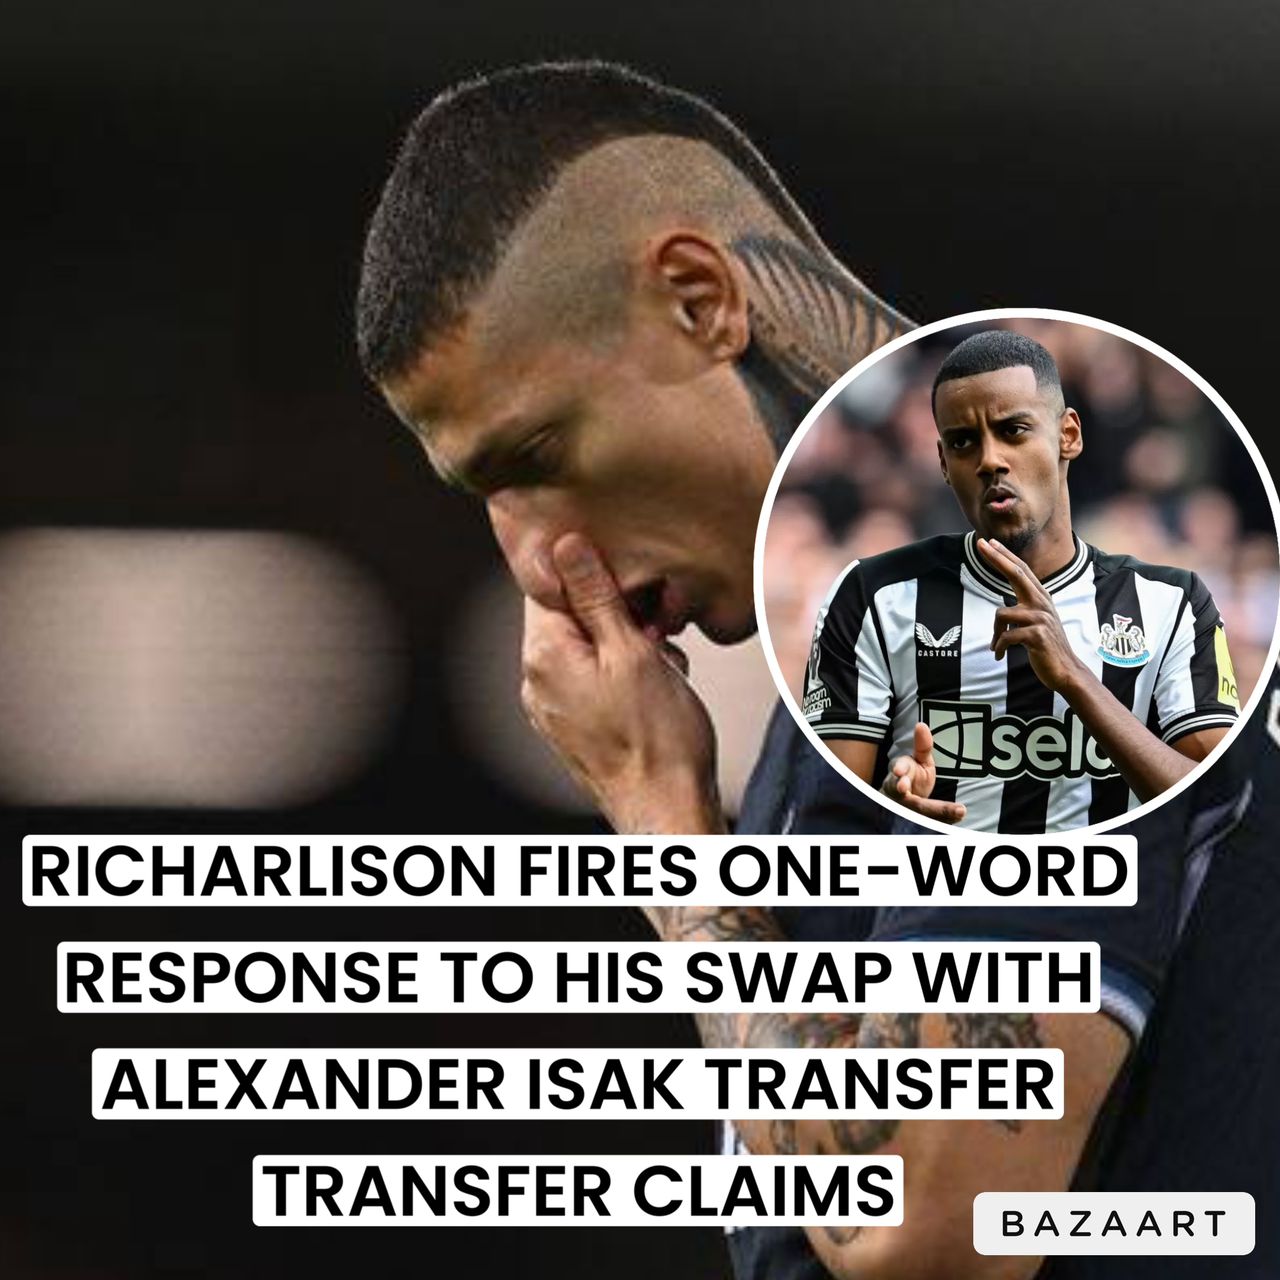 You are currently viewing RICHARLISON FIRES ONE-WORD RESPONSE TO HIS SWAP WITH ALEXANDER ISAK TRANSFER TRANSFER CLAIMS  “The perfect response the fans needed to know their current stance in making transfer become reality